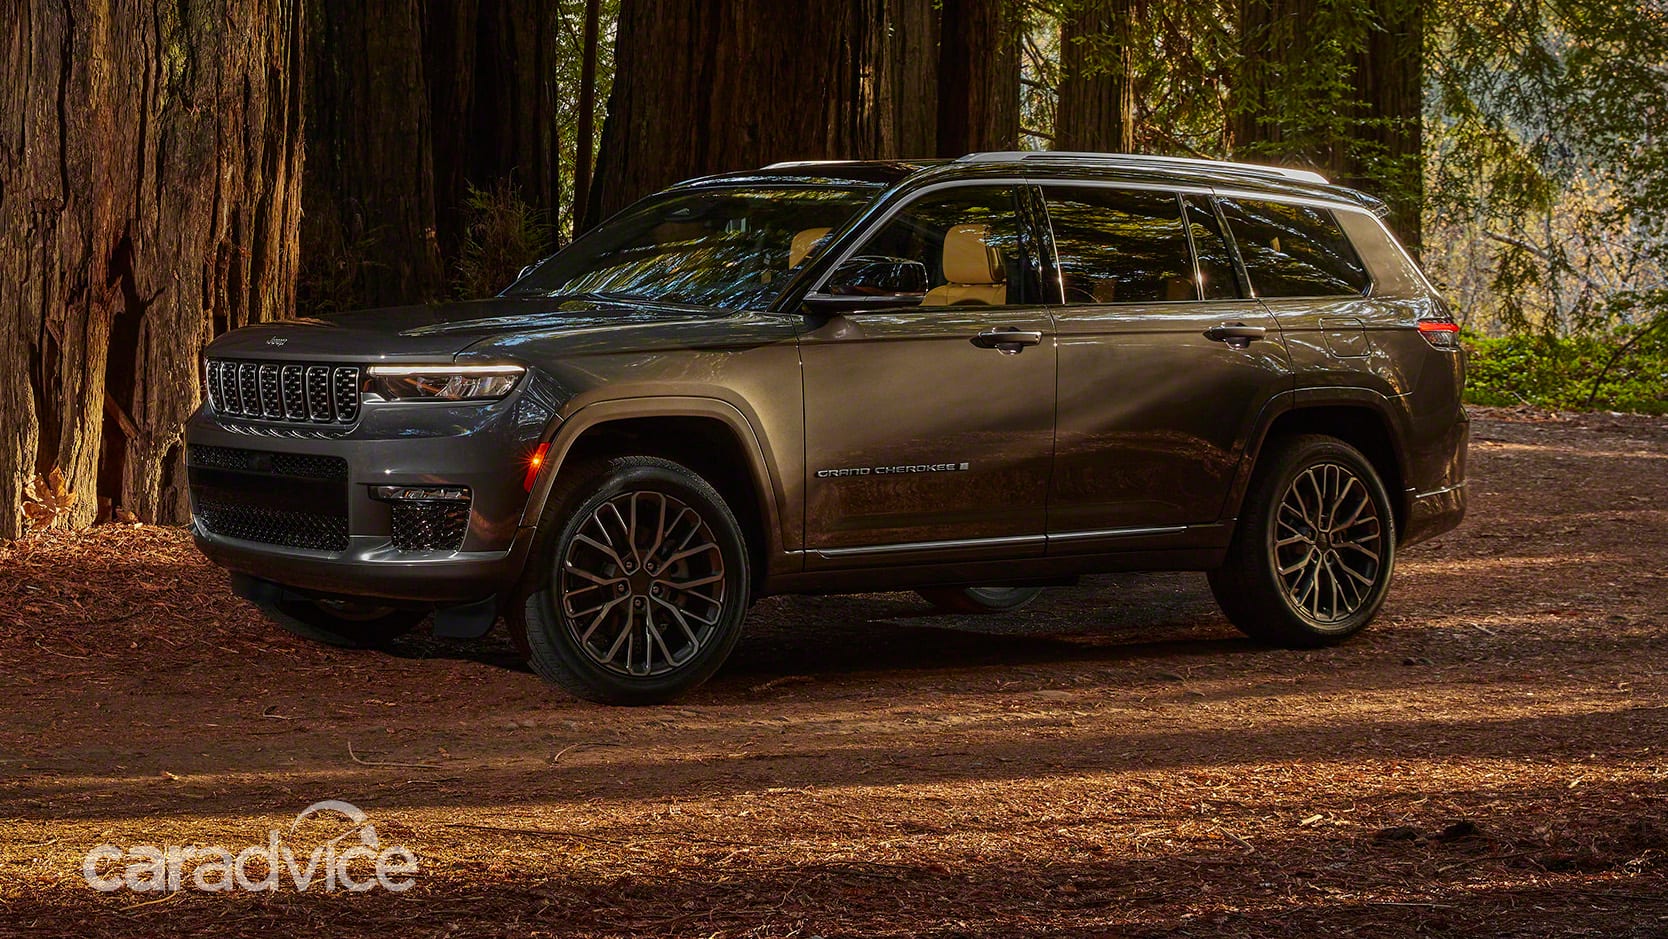 2021 Jeep Grand Cherokee L revealed: All-new family SUV ...